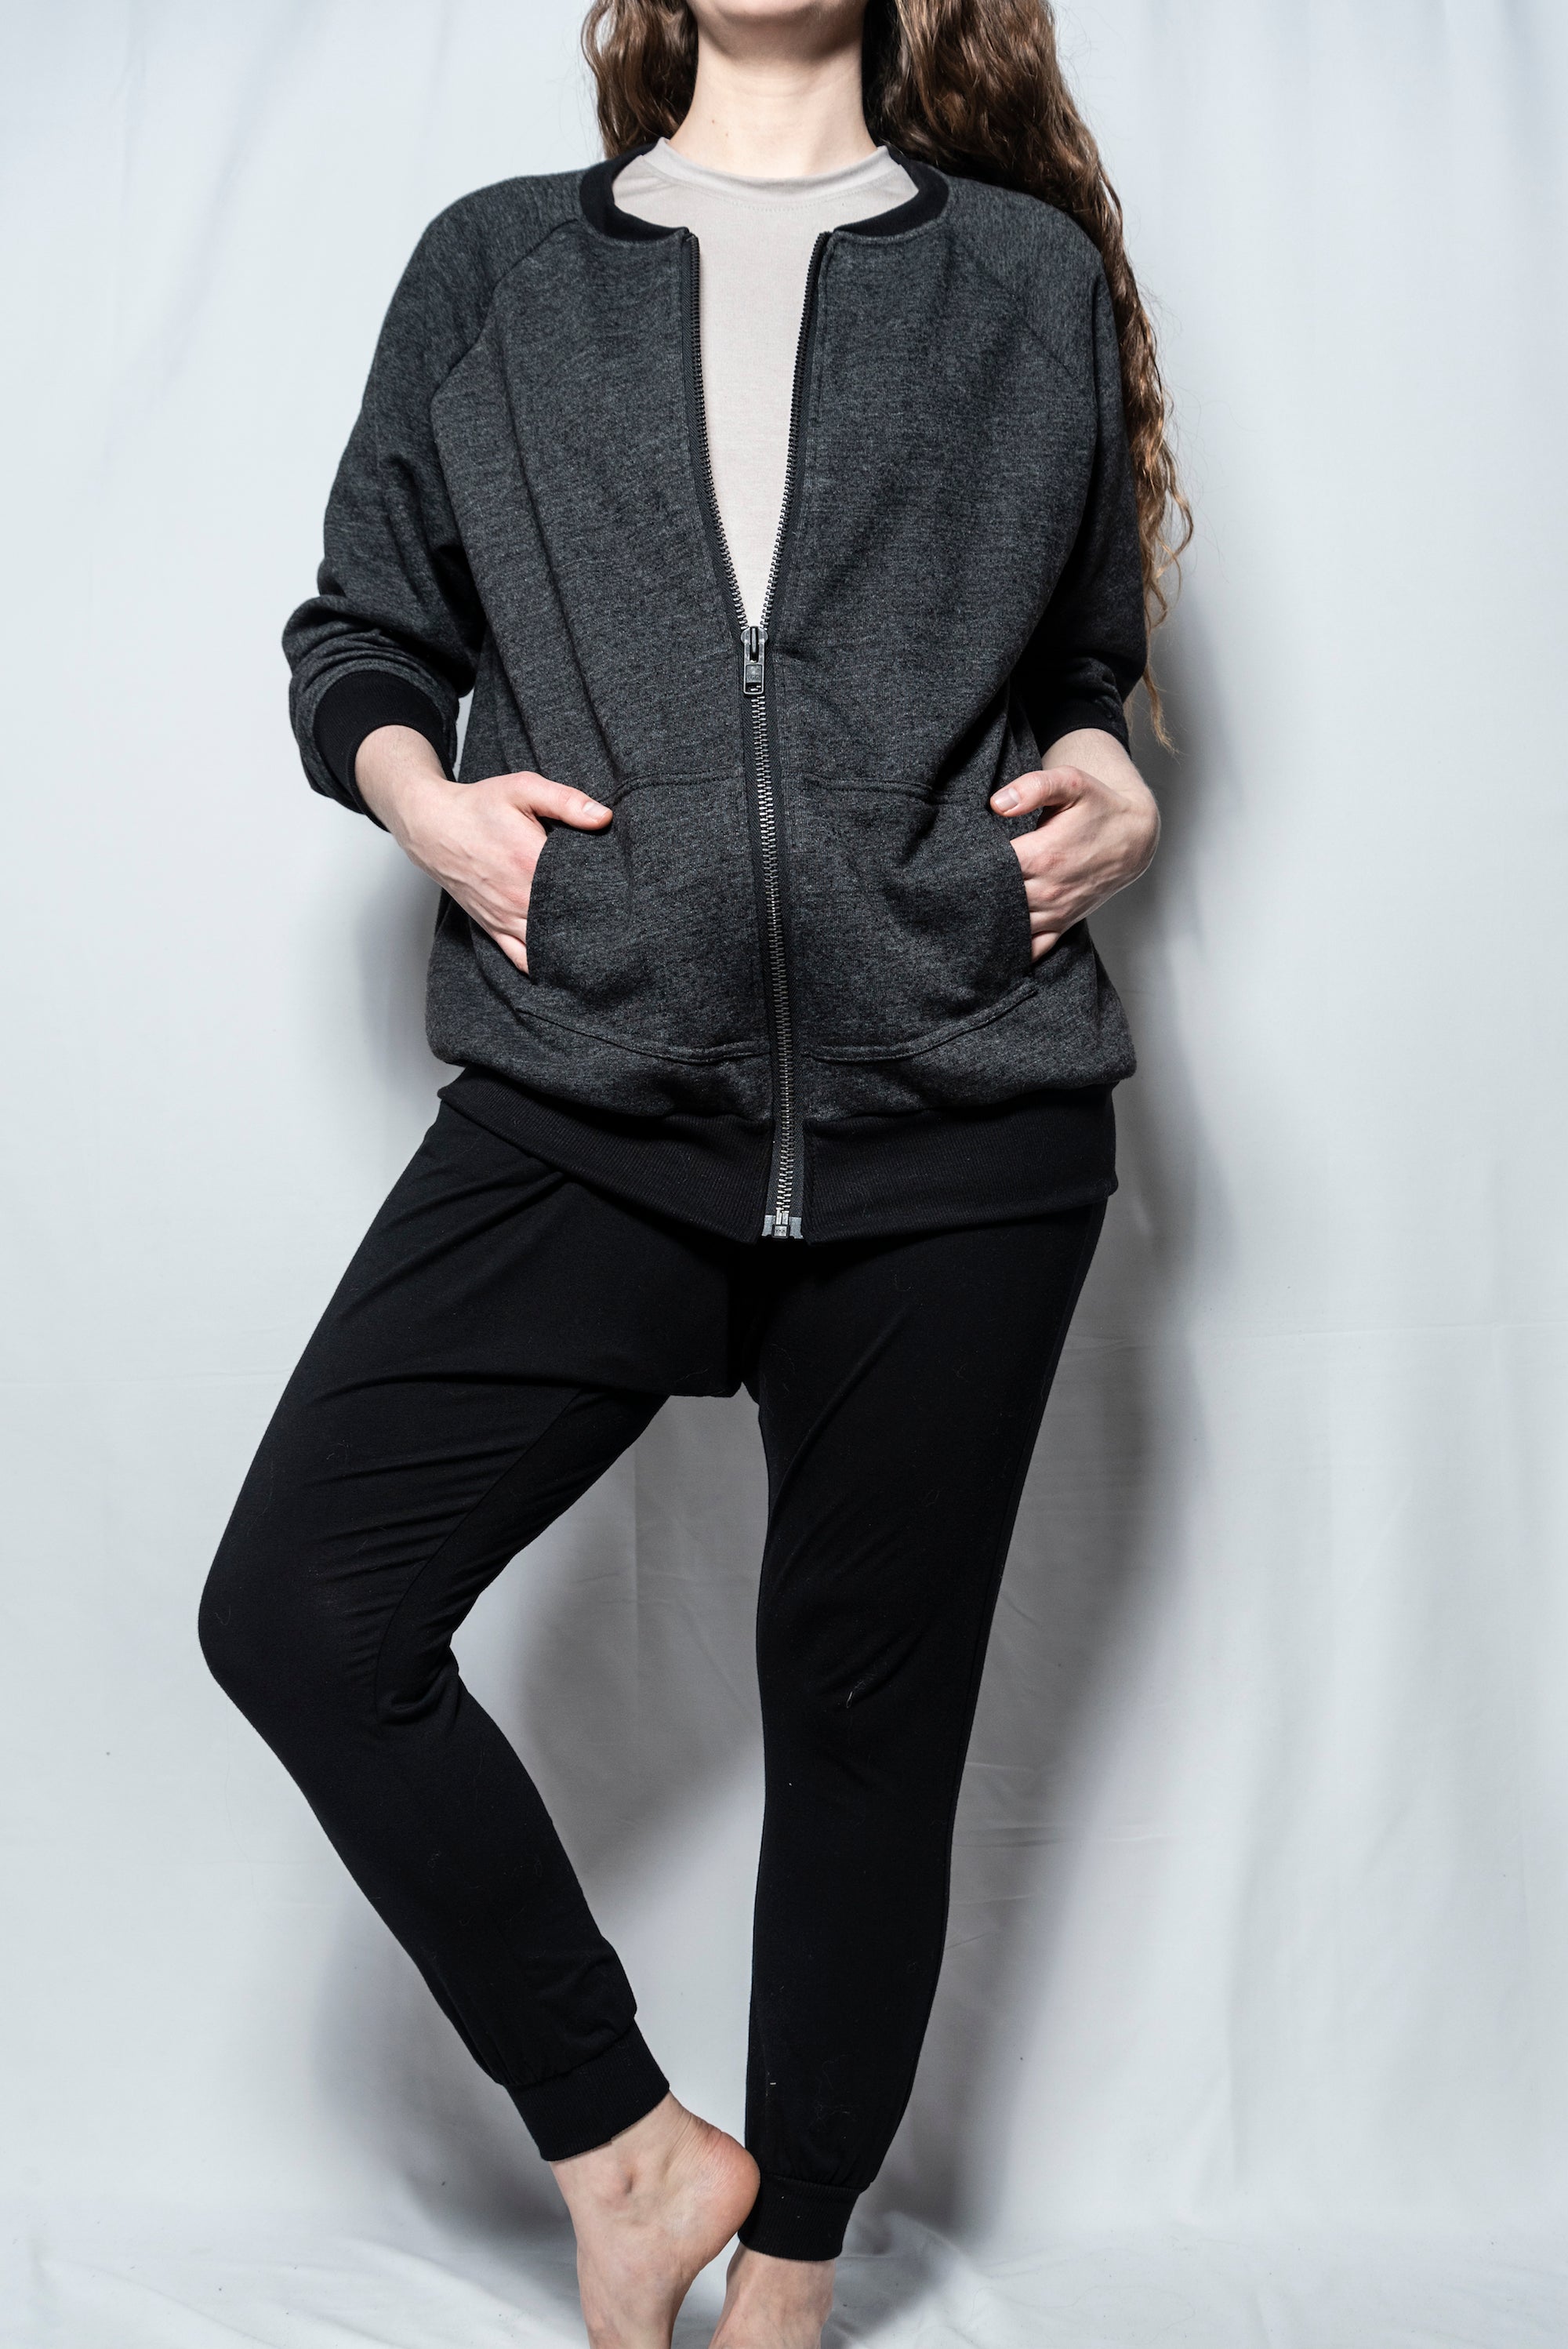 The Bomber Jacket by Cassandra Elizabeth is an ethically made, minimalist wardrobe essential, and is the epitome of quiet luxury.